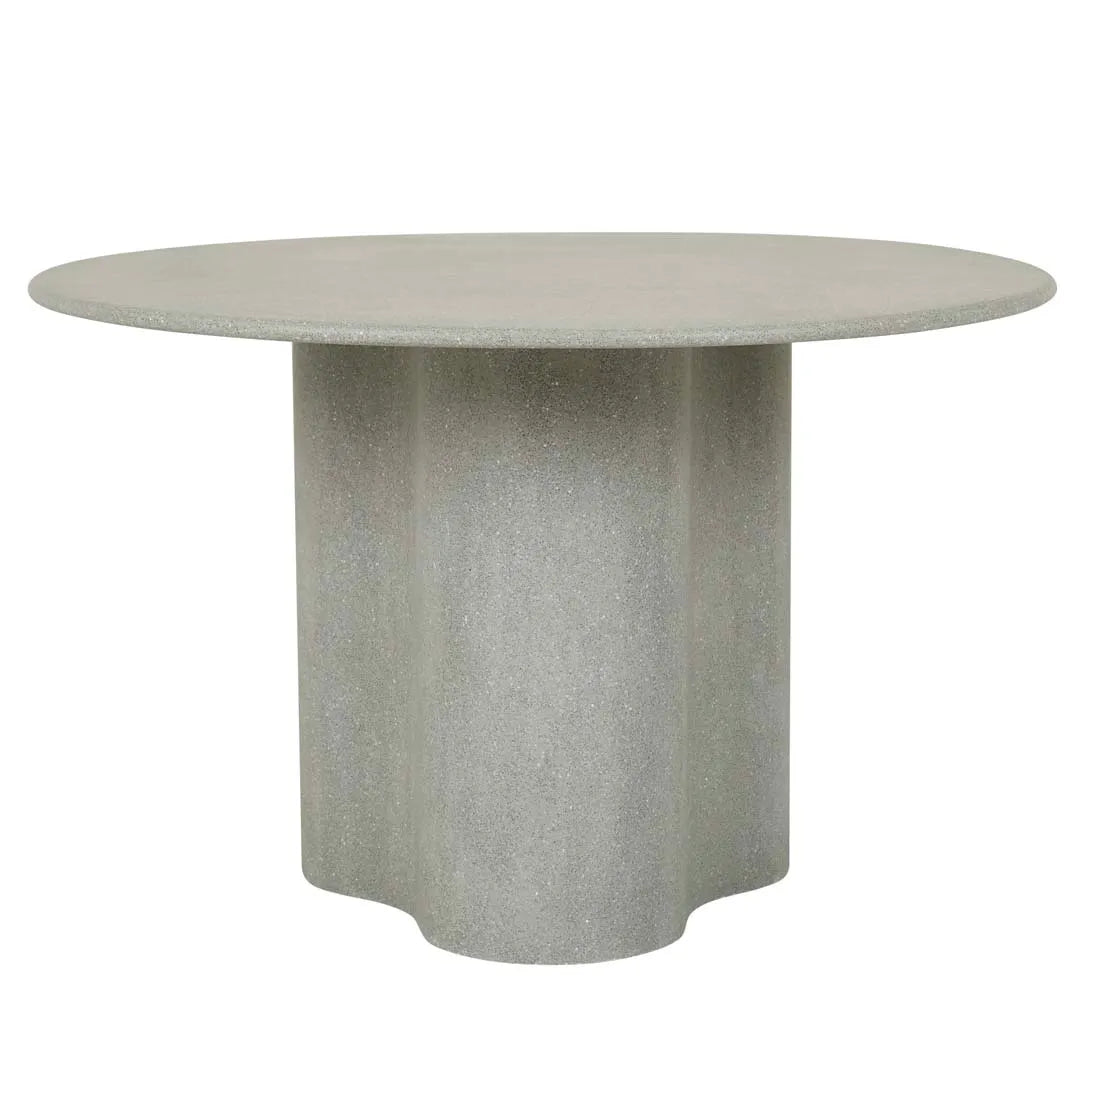 Artie Wave Outdoor Dining Table - Sage Speckle